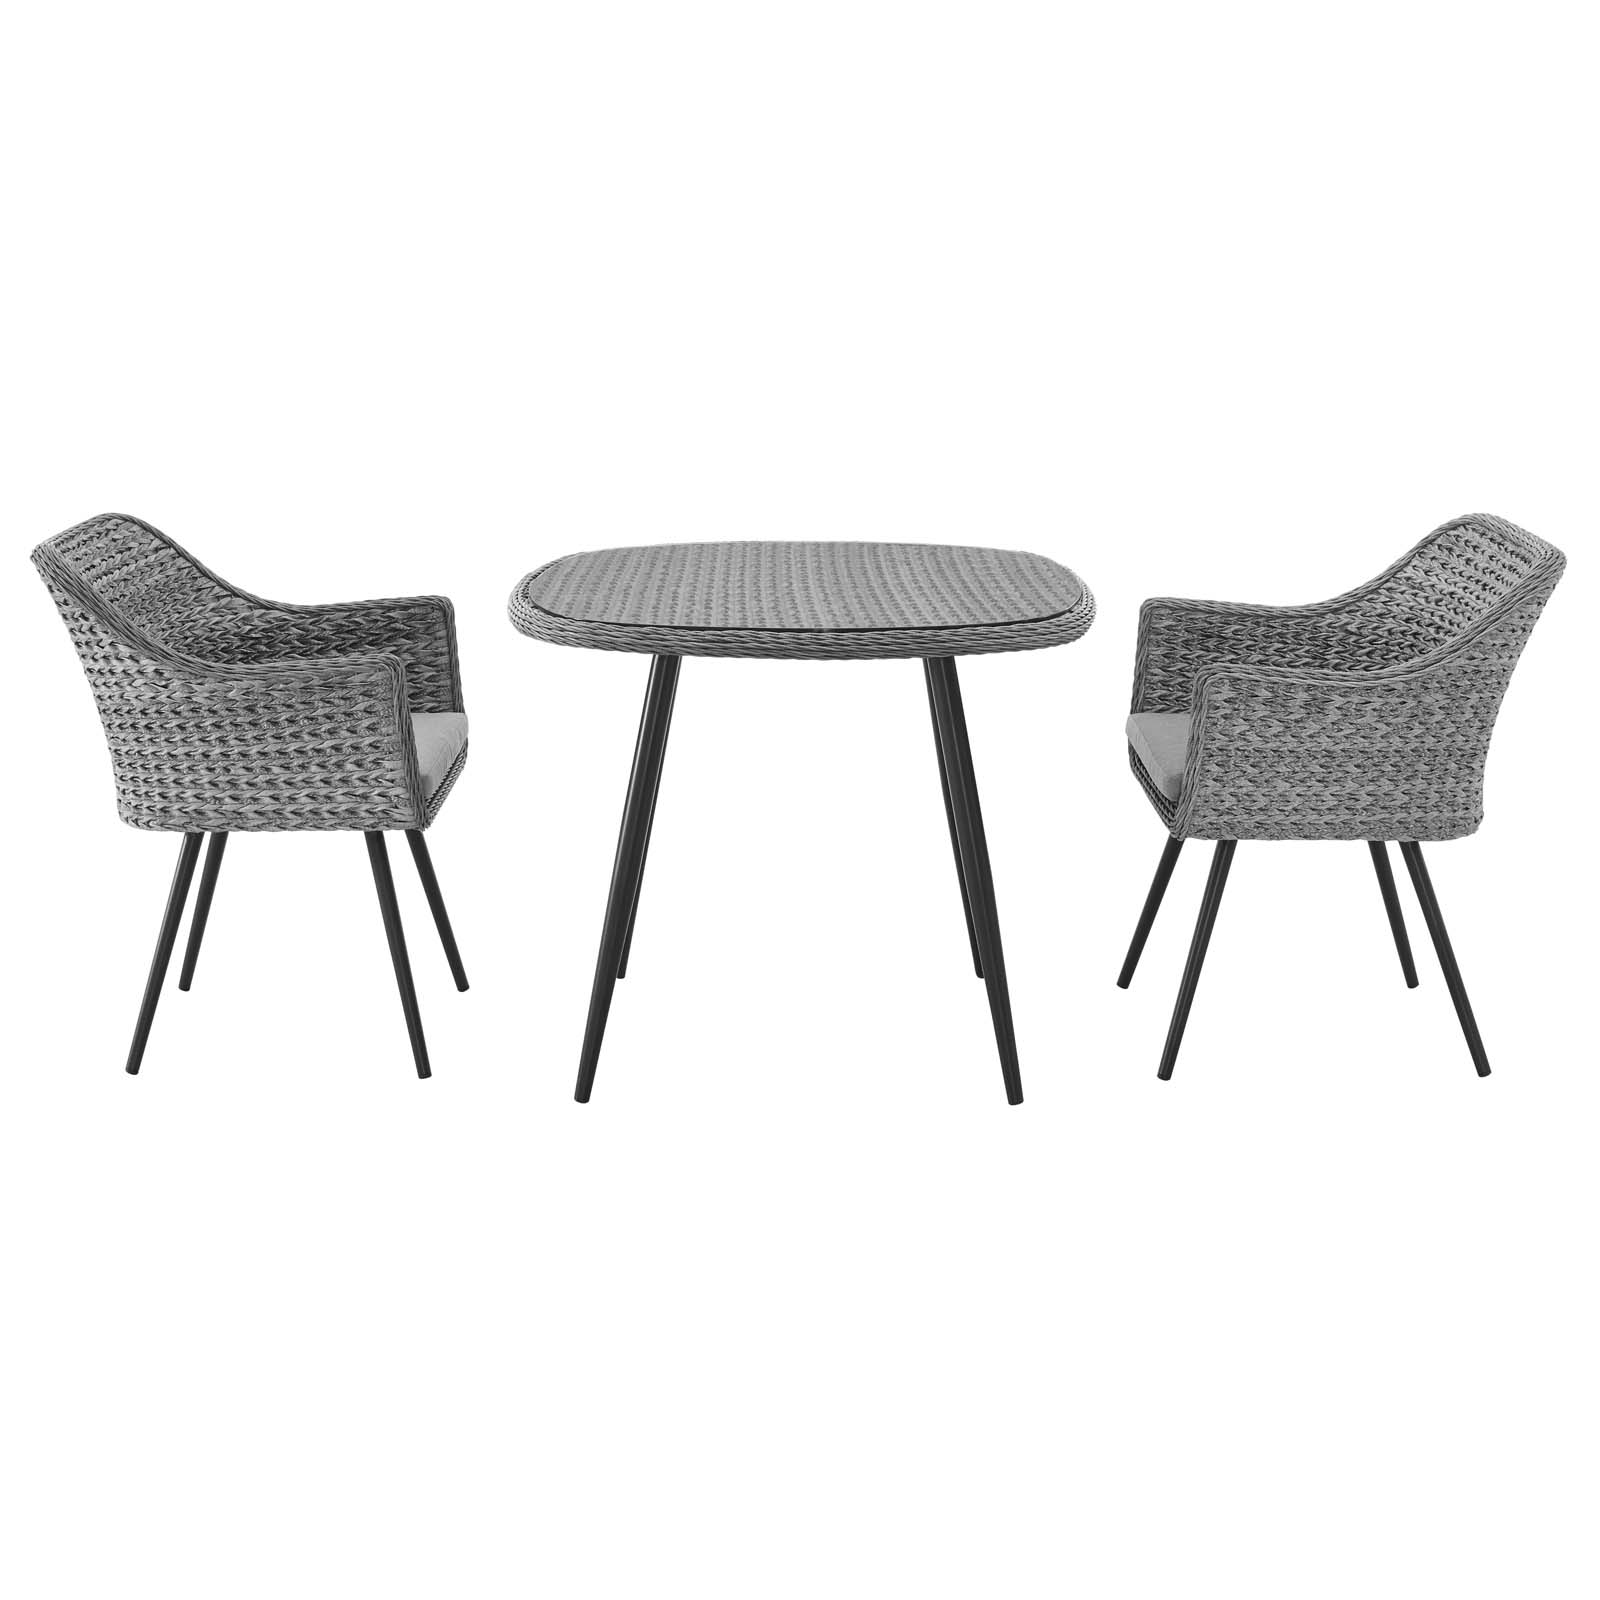 Contemporary Modern Urban Designer Outdoor Patio Balcony Garden Furniture Side Dining Chair and Table Set, Fabric Rattan Wicker Aluminum, Grey Gray - image 4 of 8